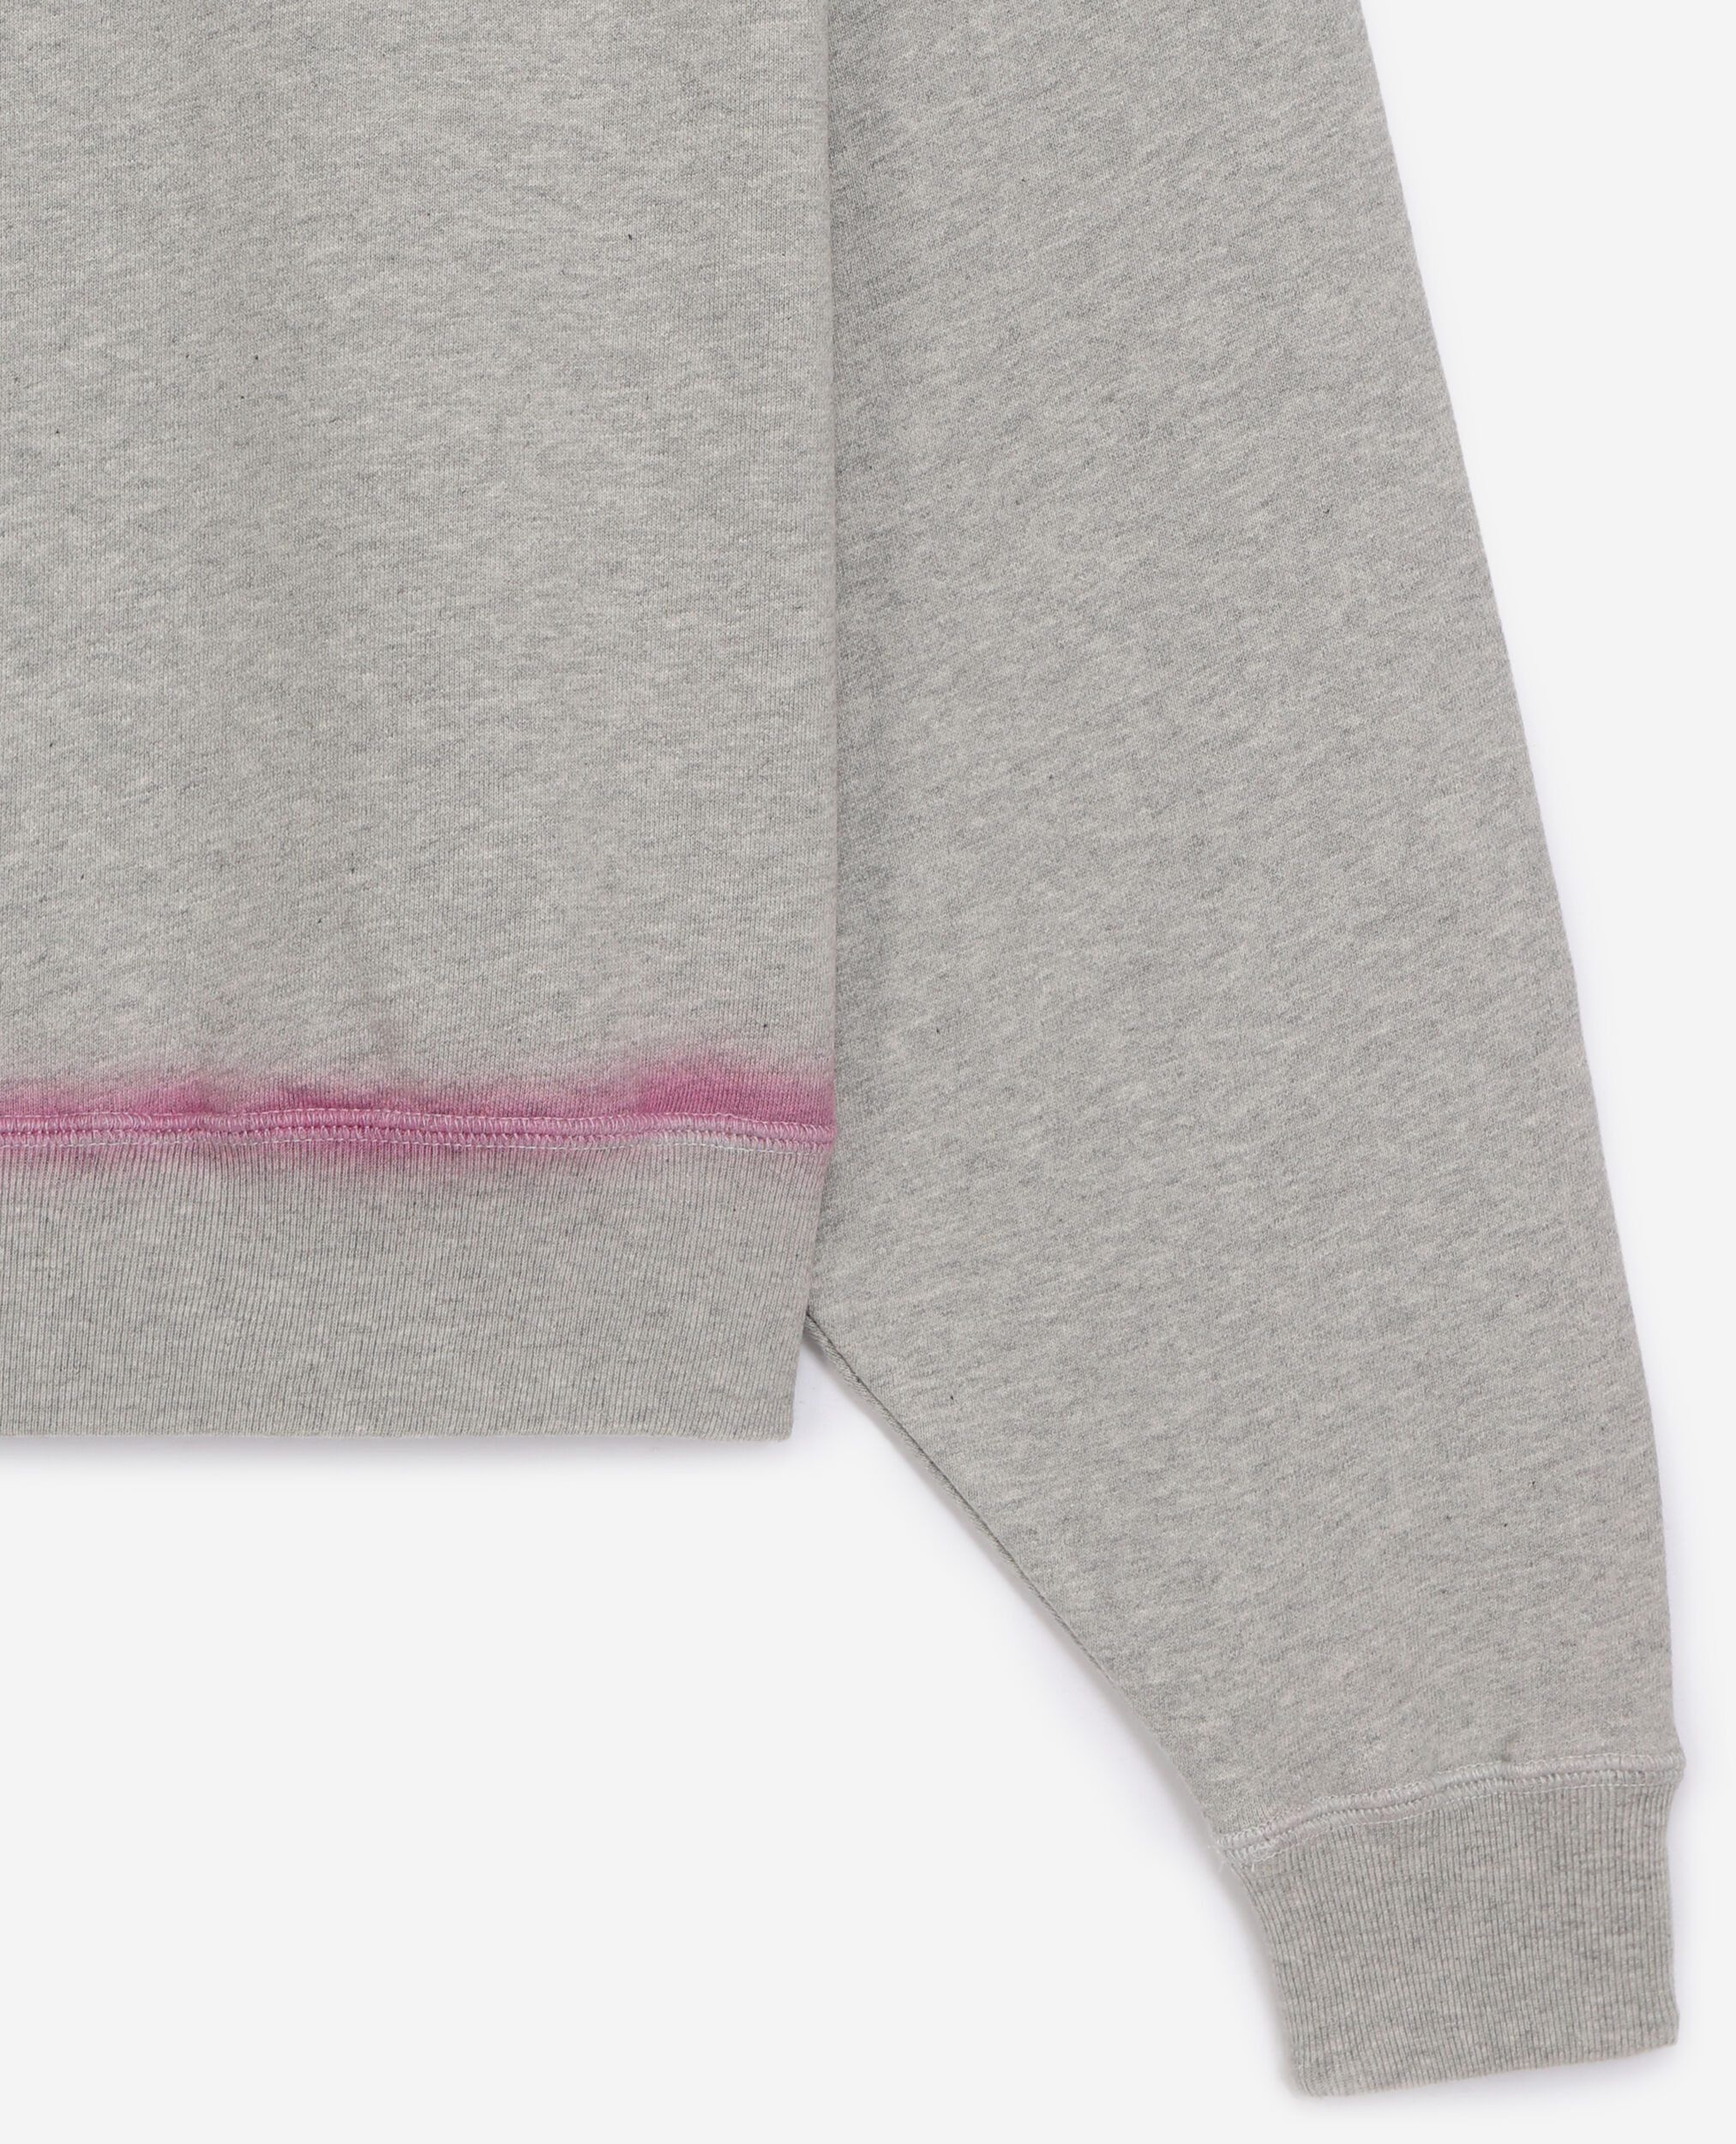 Grey sweatshirt with pink details and fading, GREY CHINE, hi-res image number null